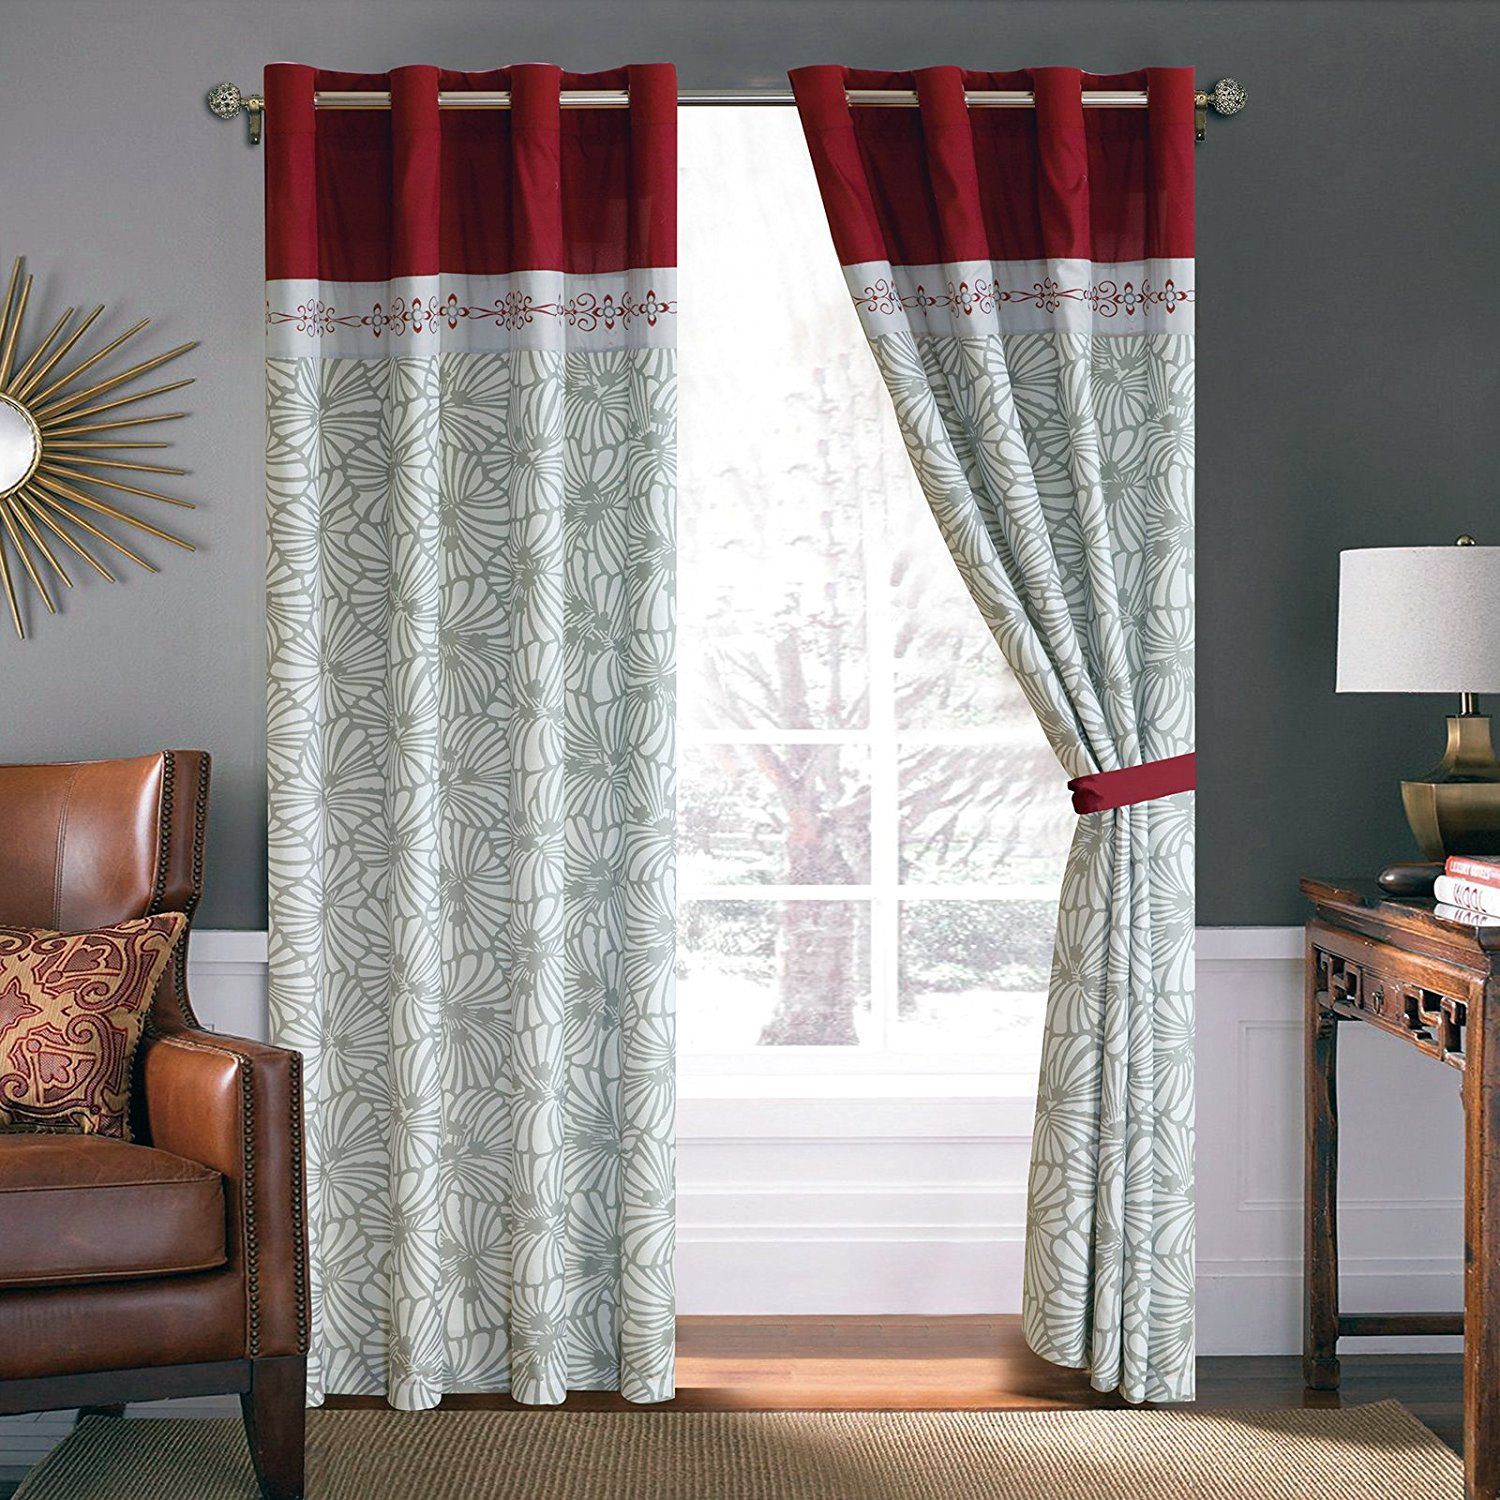 Red Burgundy Floral Window Curtains | Burgundy Curtains Regarding Kitchen Burgundy/white Curtain Sets (View 3 of 20)